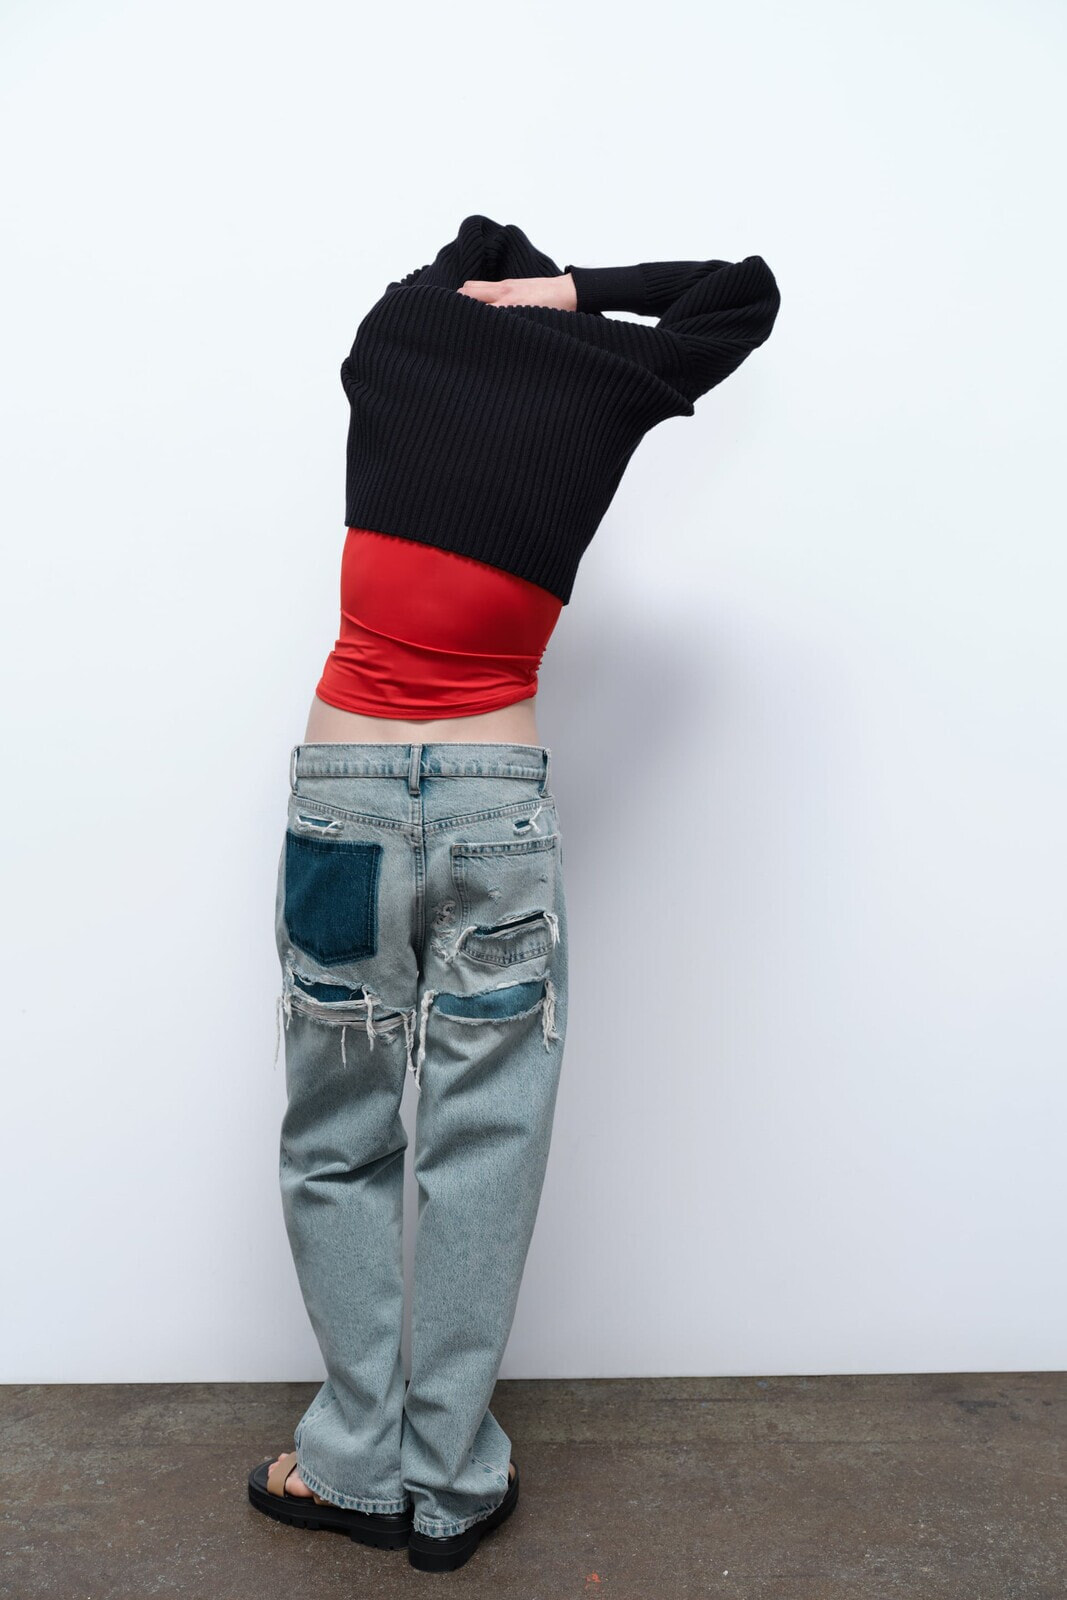 Trf baggy jeans with rips